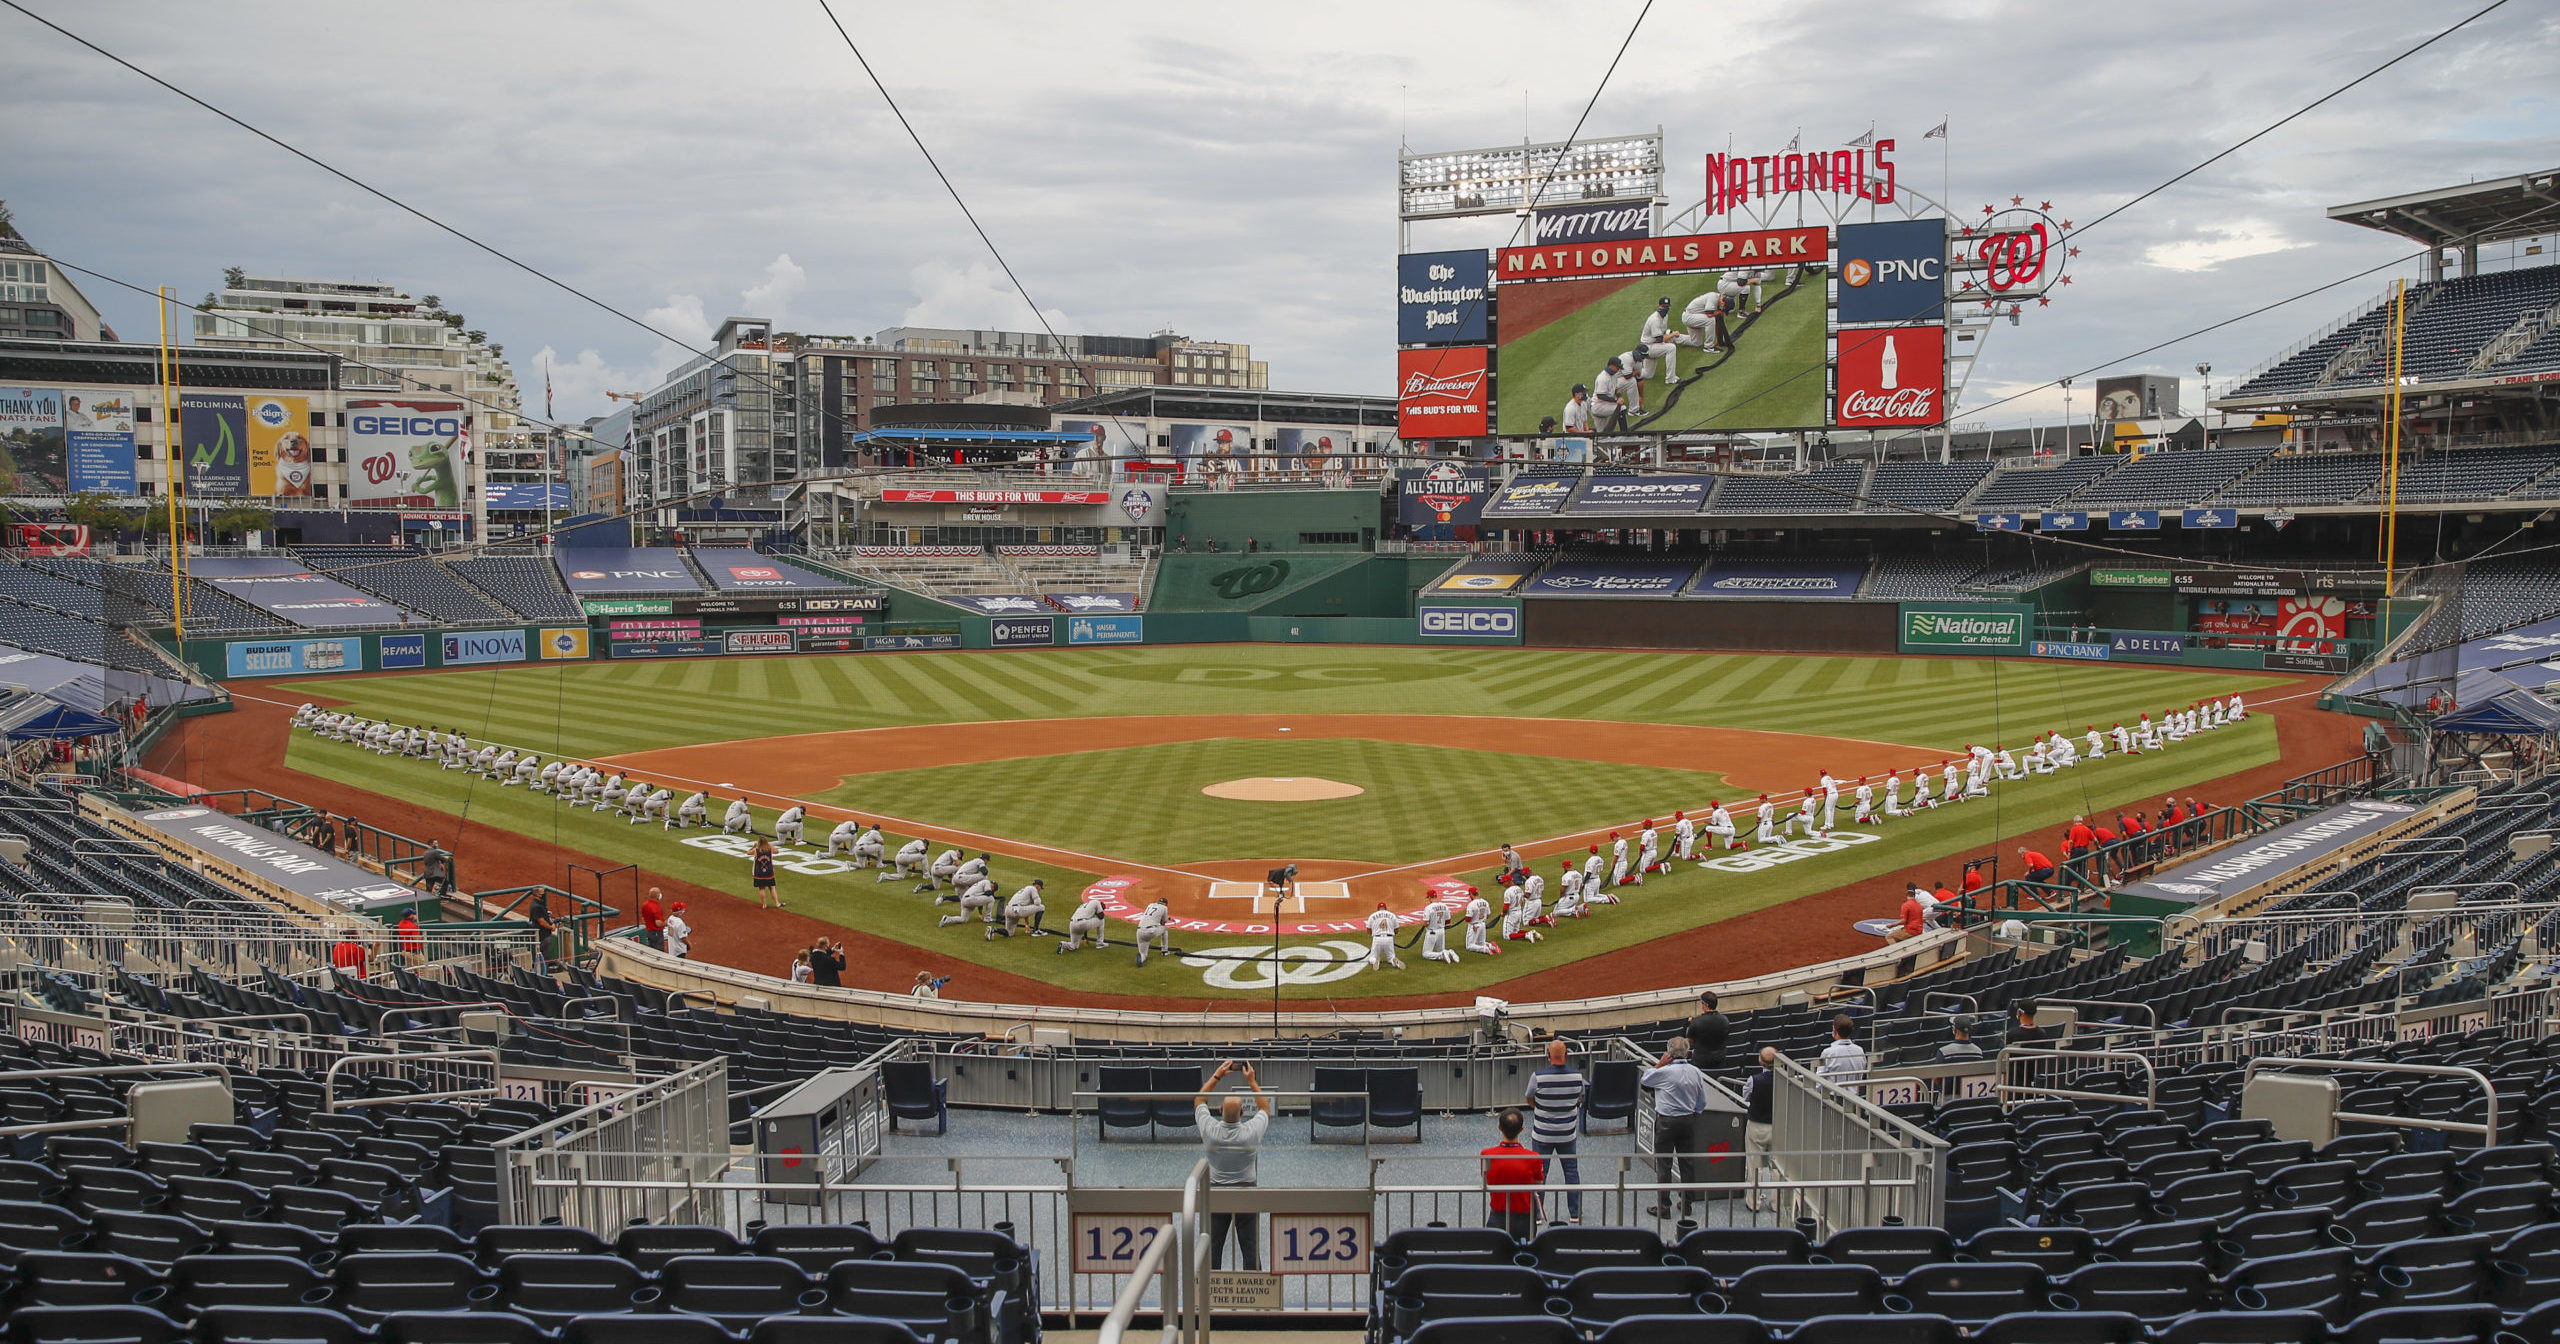 The New York Yankees and the Washington Nationals kneel while holding a black ribbon to honor Black Lives Matter before playing an opening day baseball game at Nationals Park on July 23, 2020, in Washington.